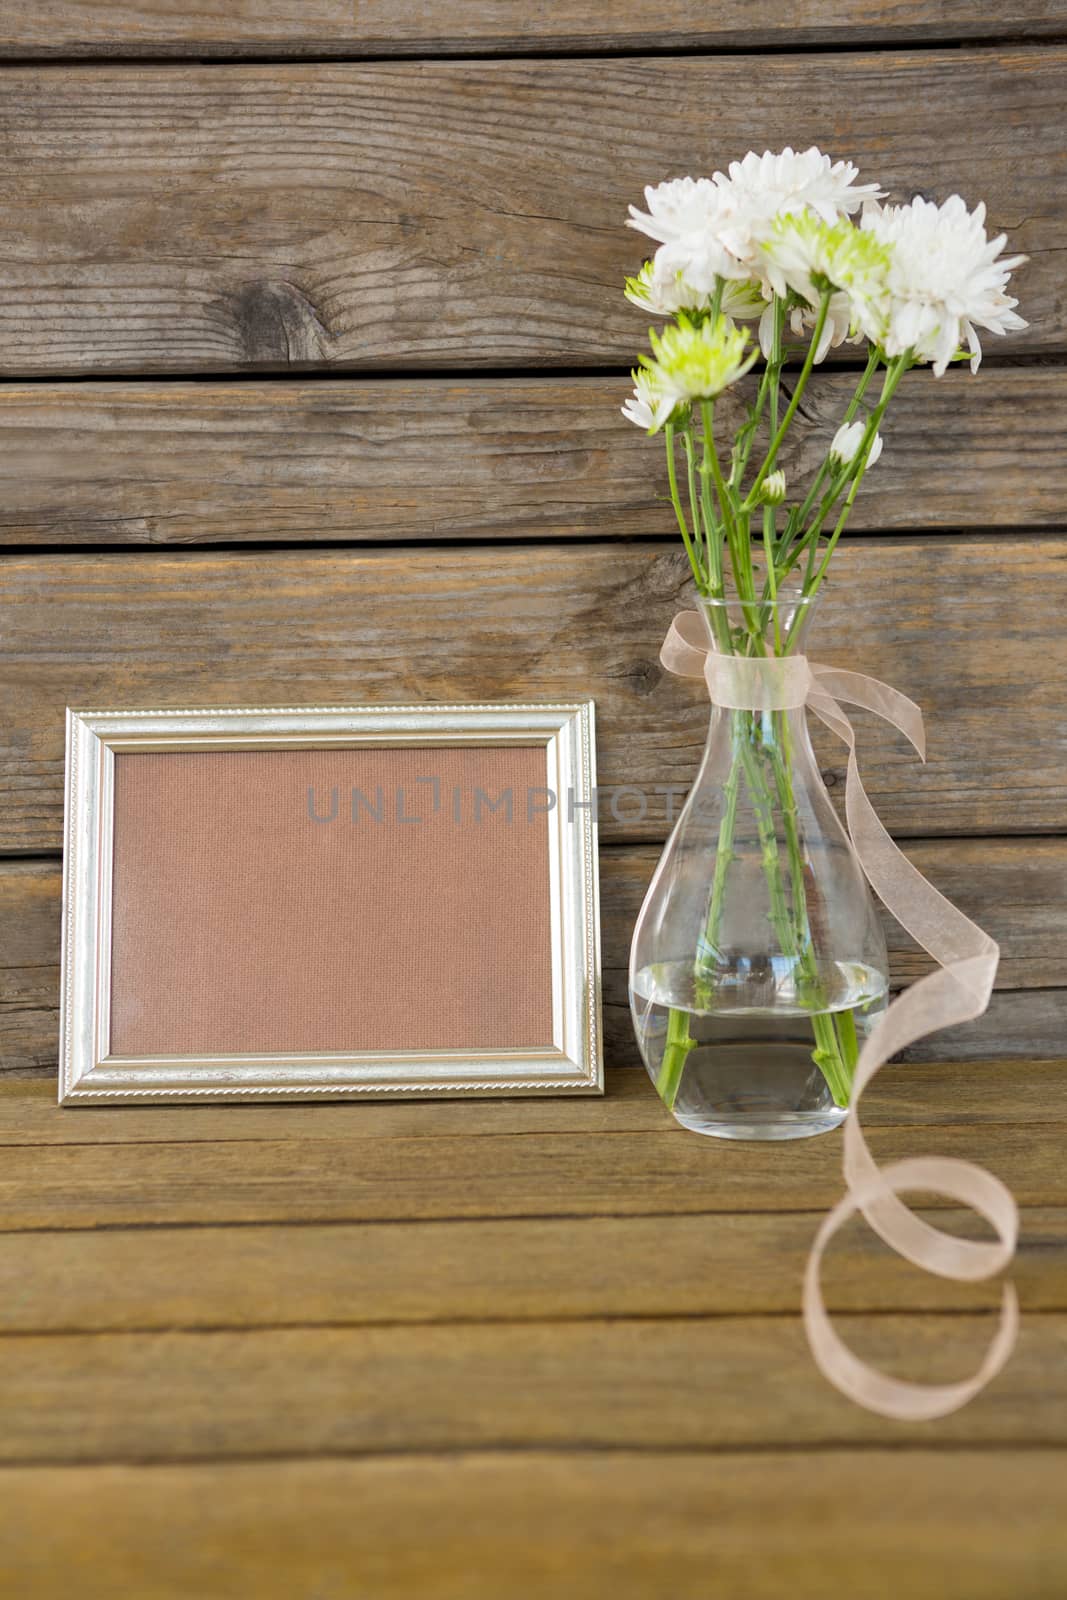 Close-up of photo frame and flower vase on wooden surface